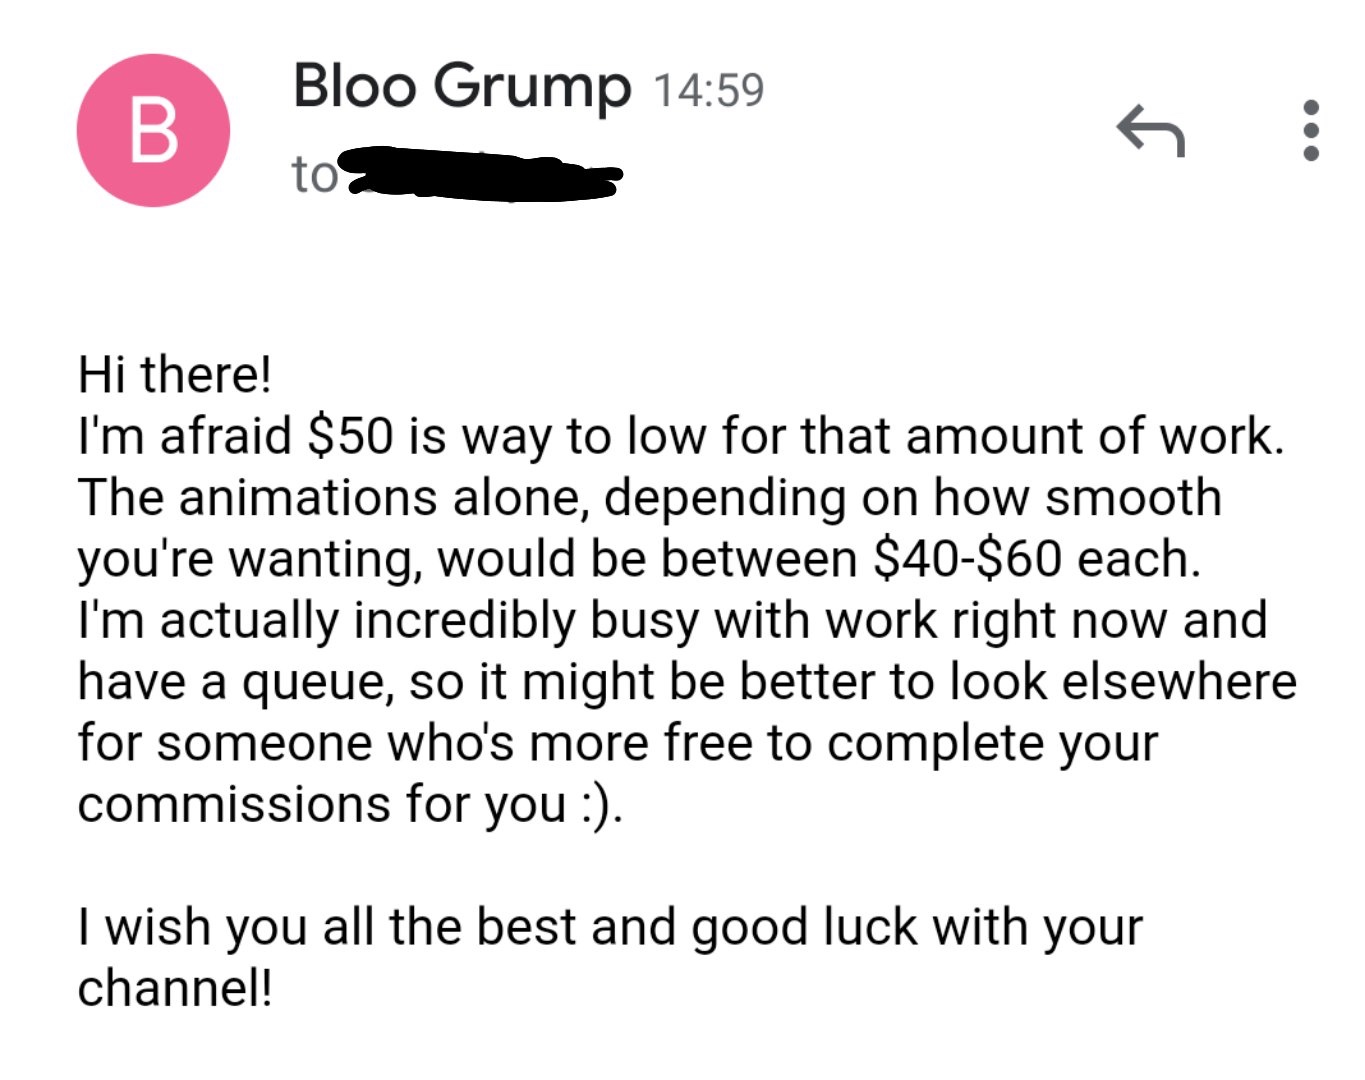 angle - Bloo Grump to Hi there! I'm afraid $50 is way to low for that amount of work. The animations alone, depending on how smooth you're wanting, would be between $40$60 each. I'm actually incredibly busy with work right now and have a queue, so it migh